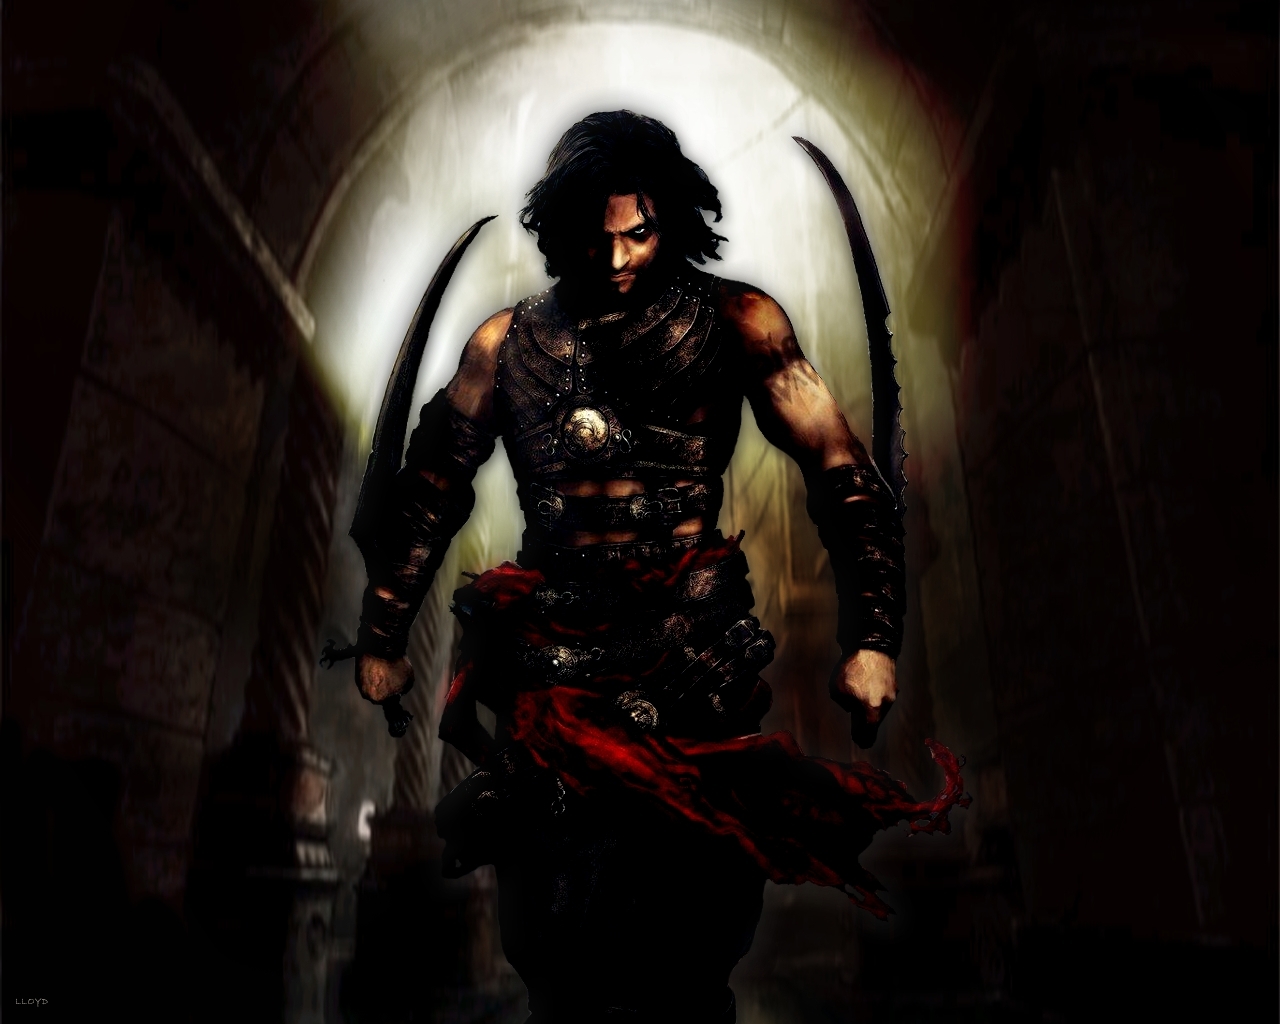 Prince Of Persia: Warrior Within Wallpapers